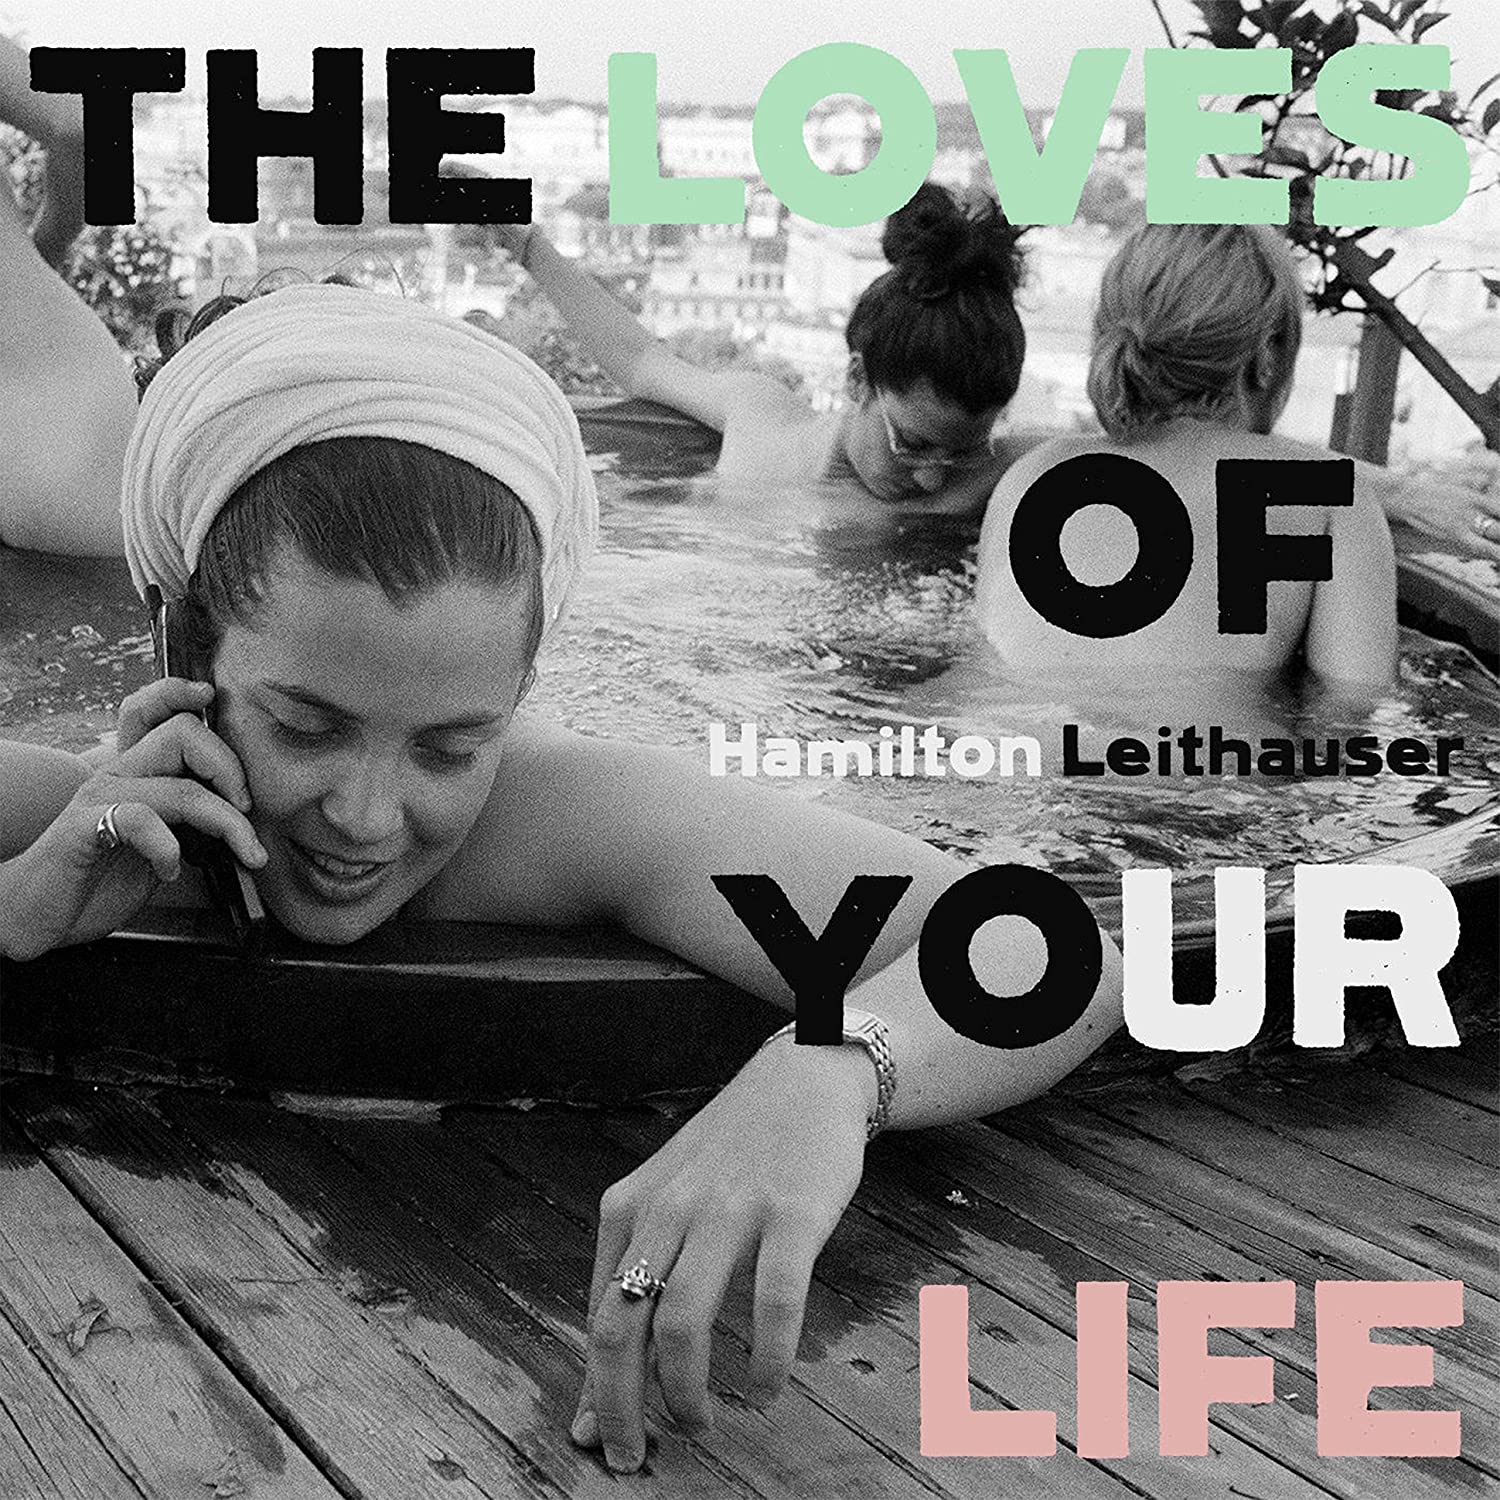 Hamilton Leithauser "The Loves of Your Life" LP